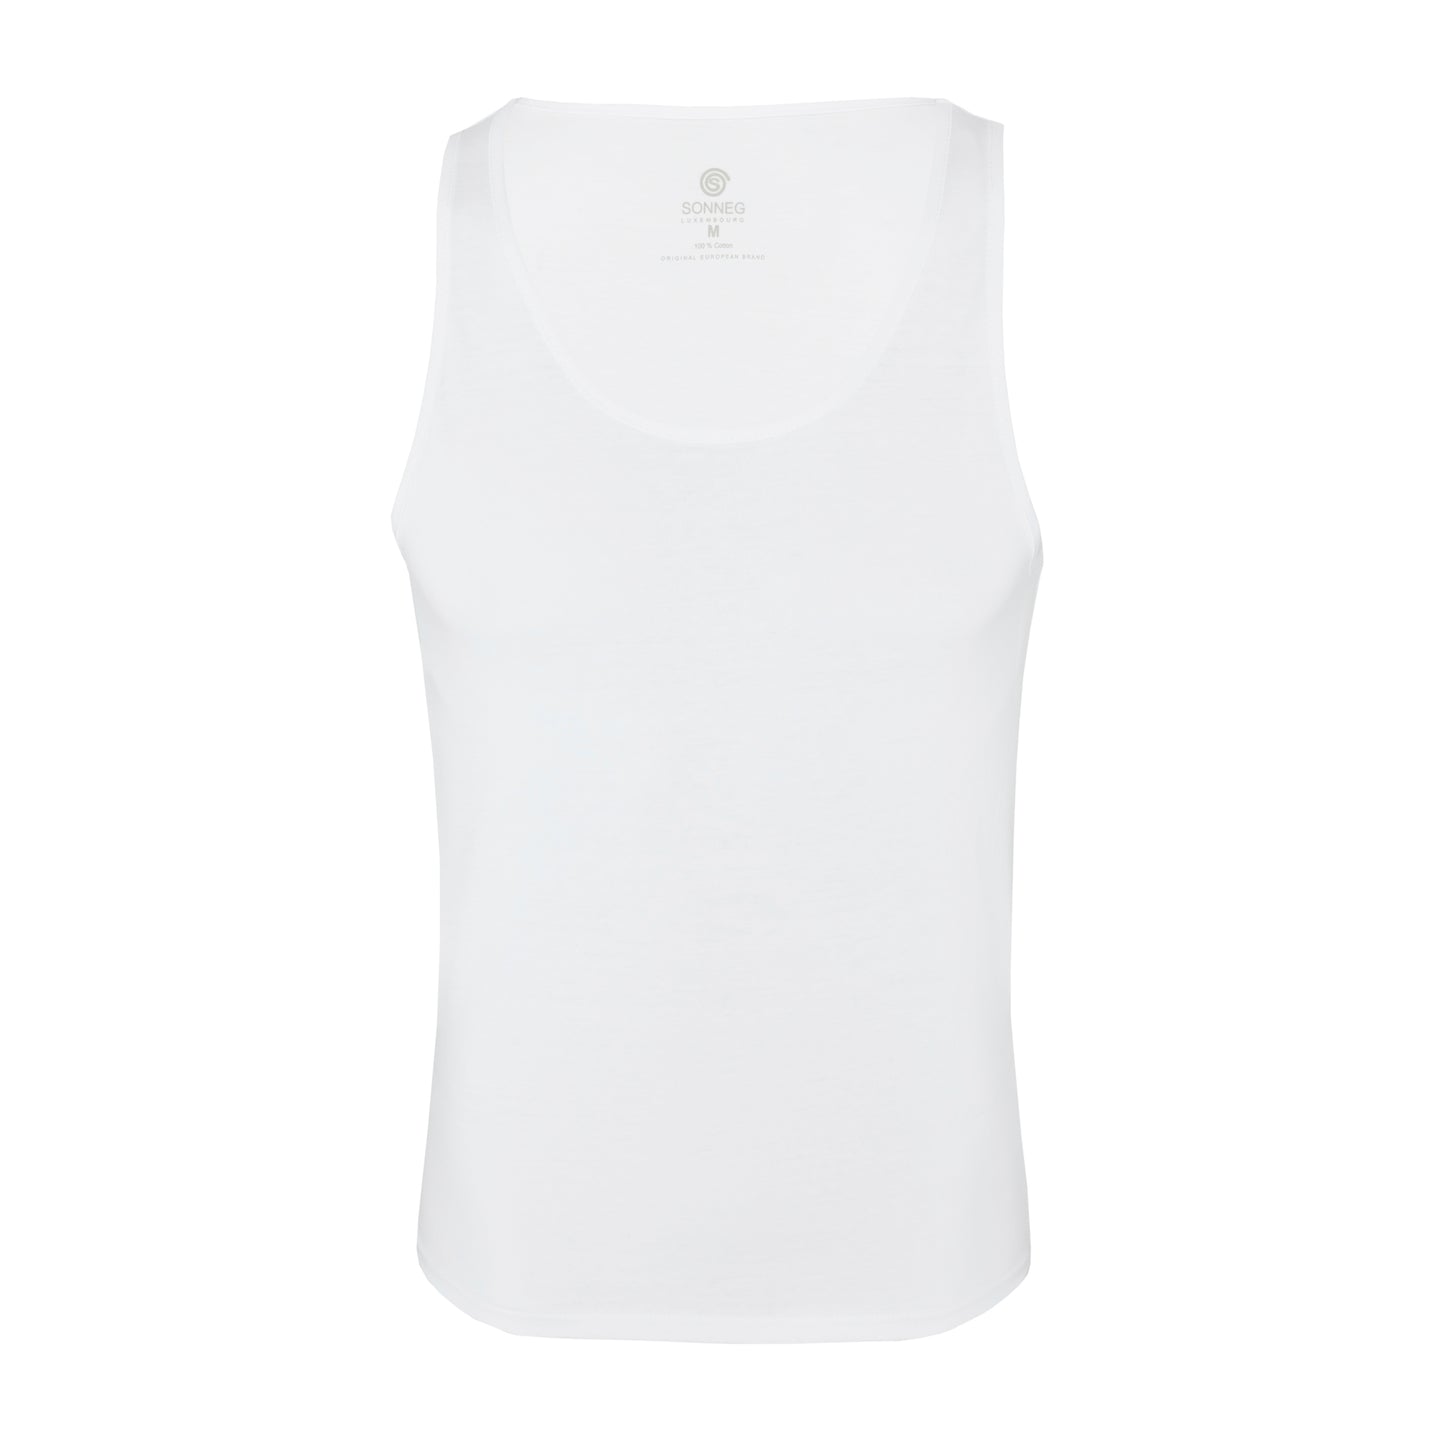 White, body fit premium tanktops – pack of 2 or 4